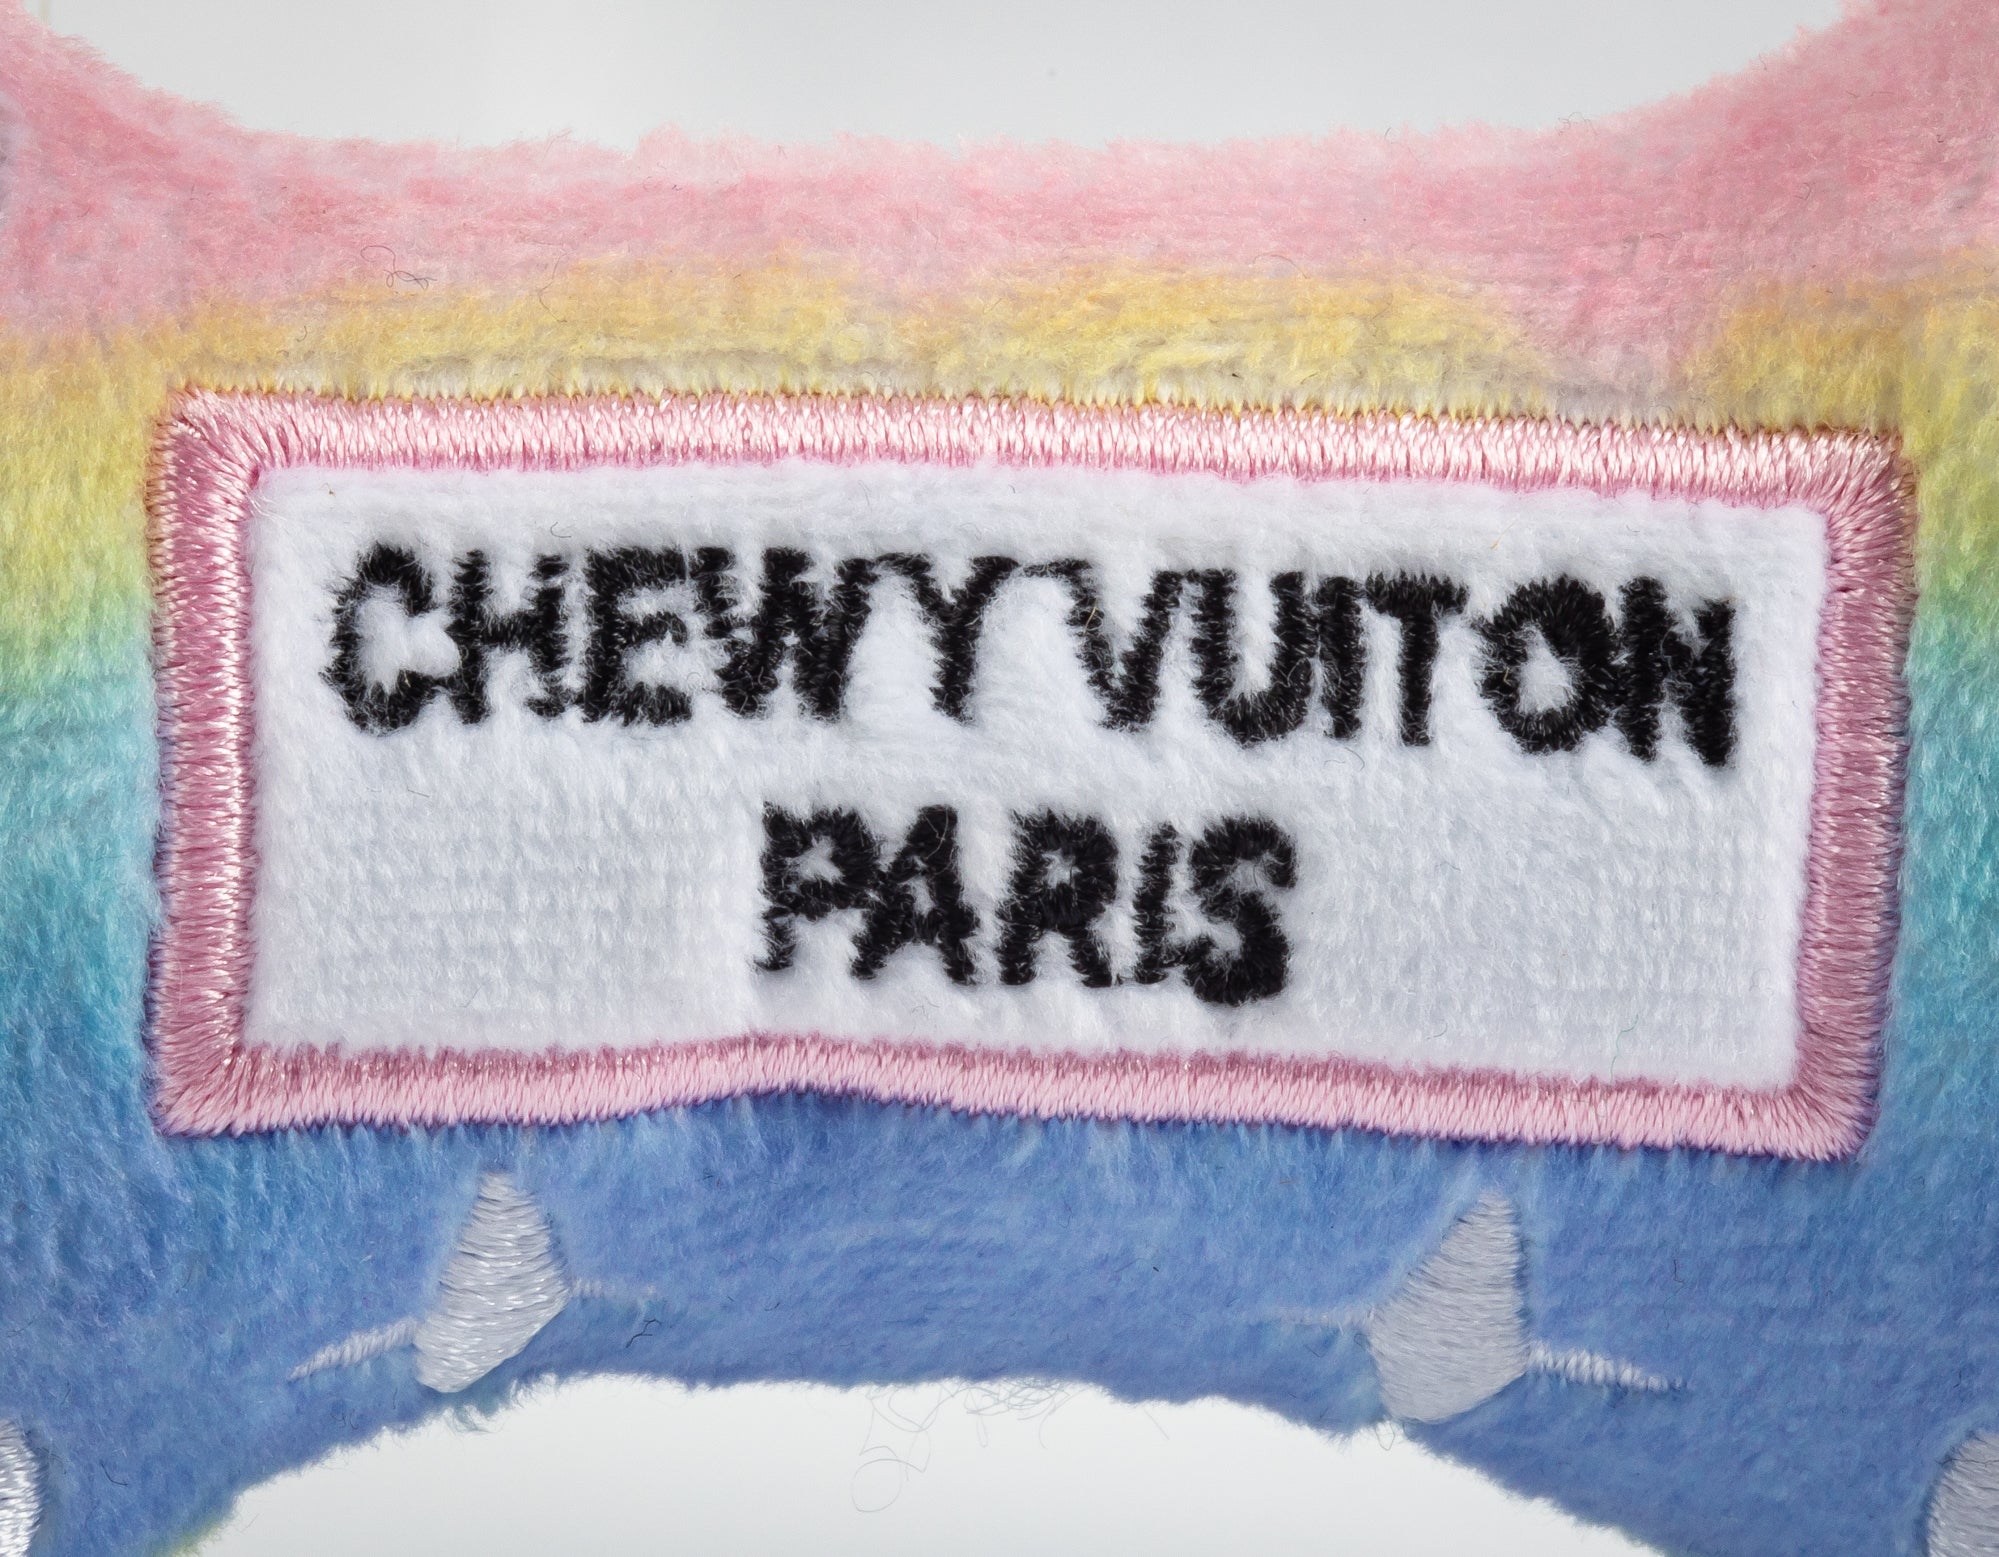 Chewy Vuitton Squeaky Bone – No Bones About it